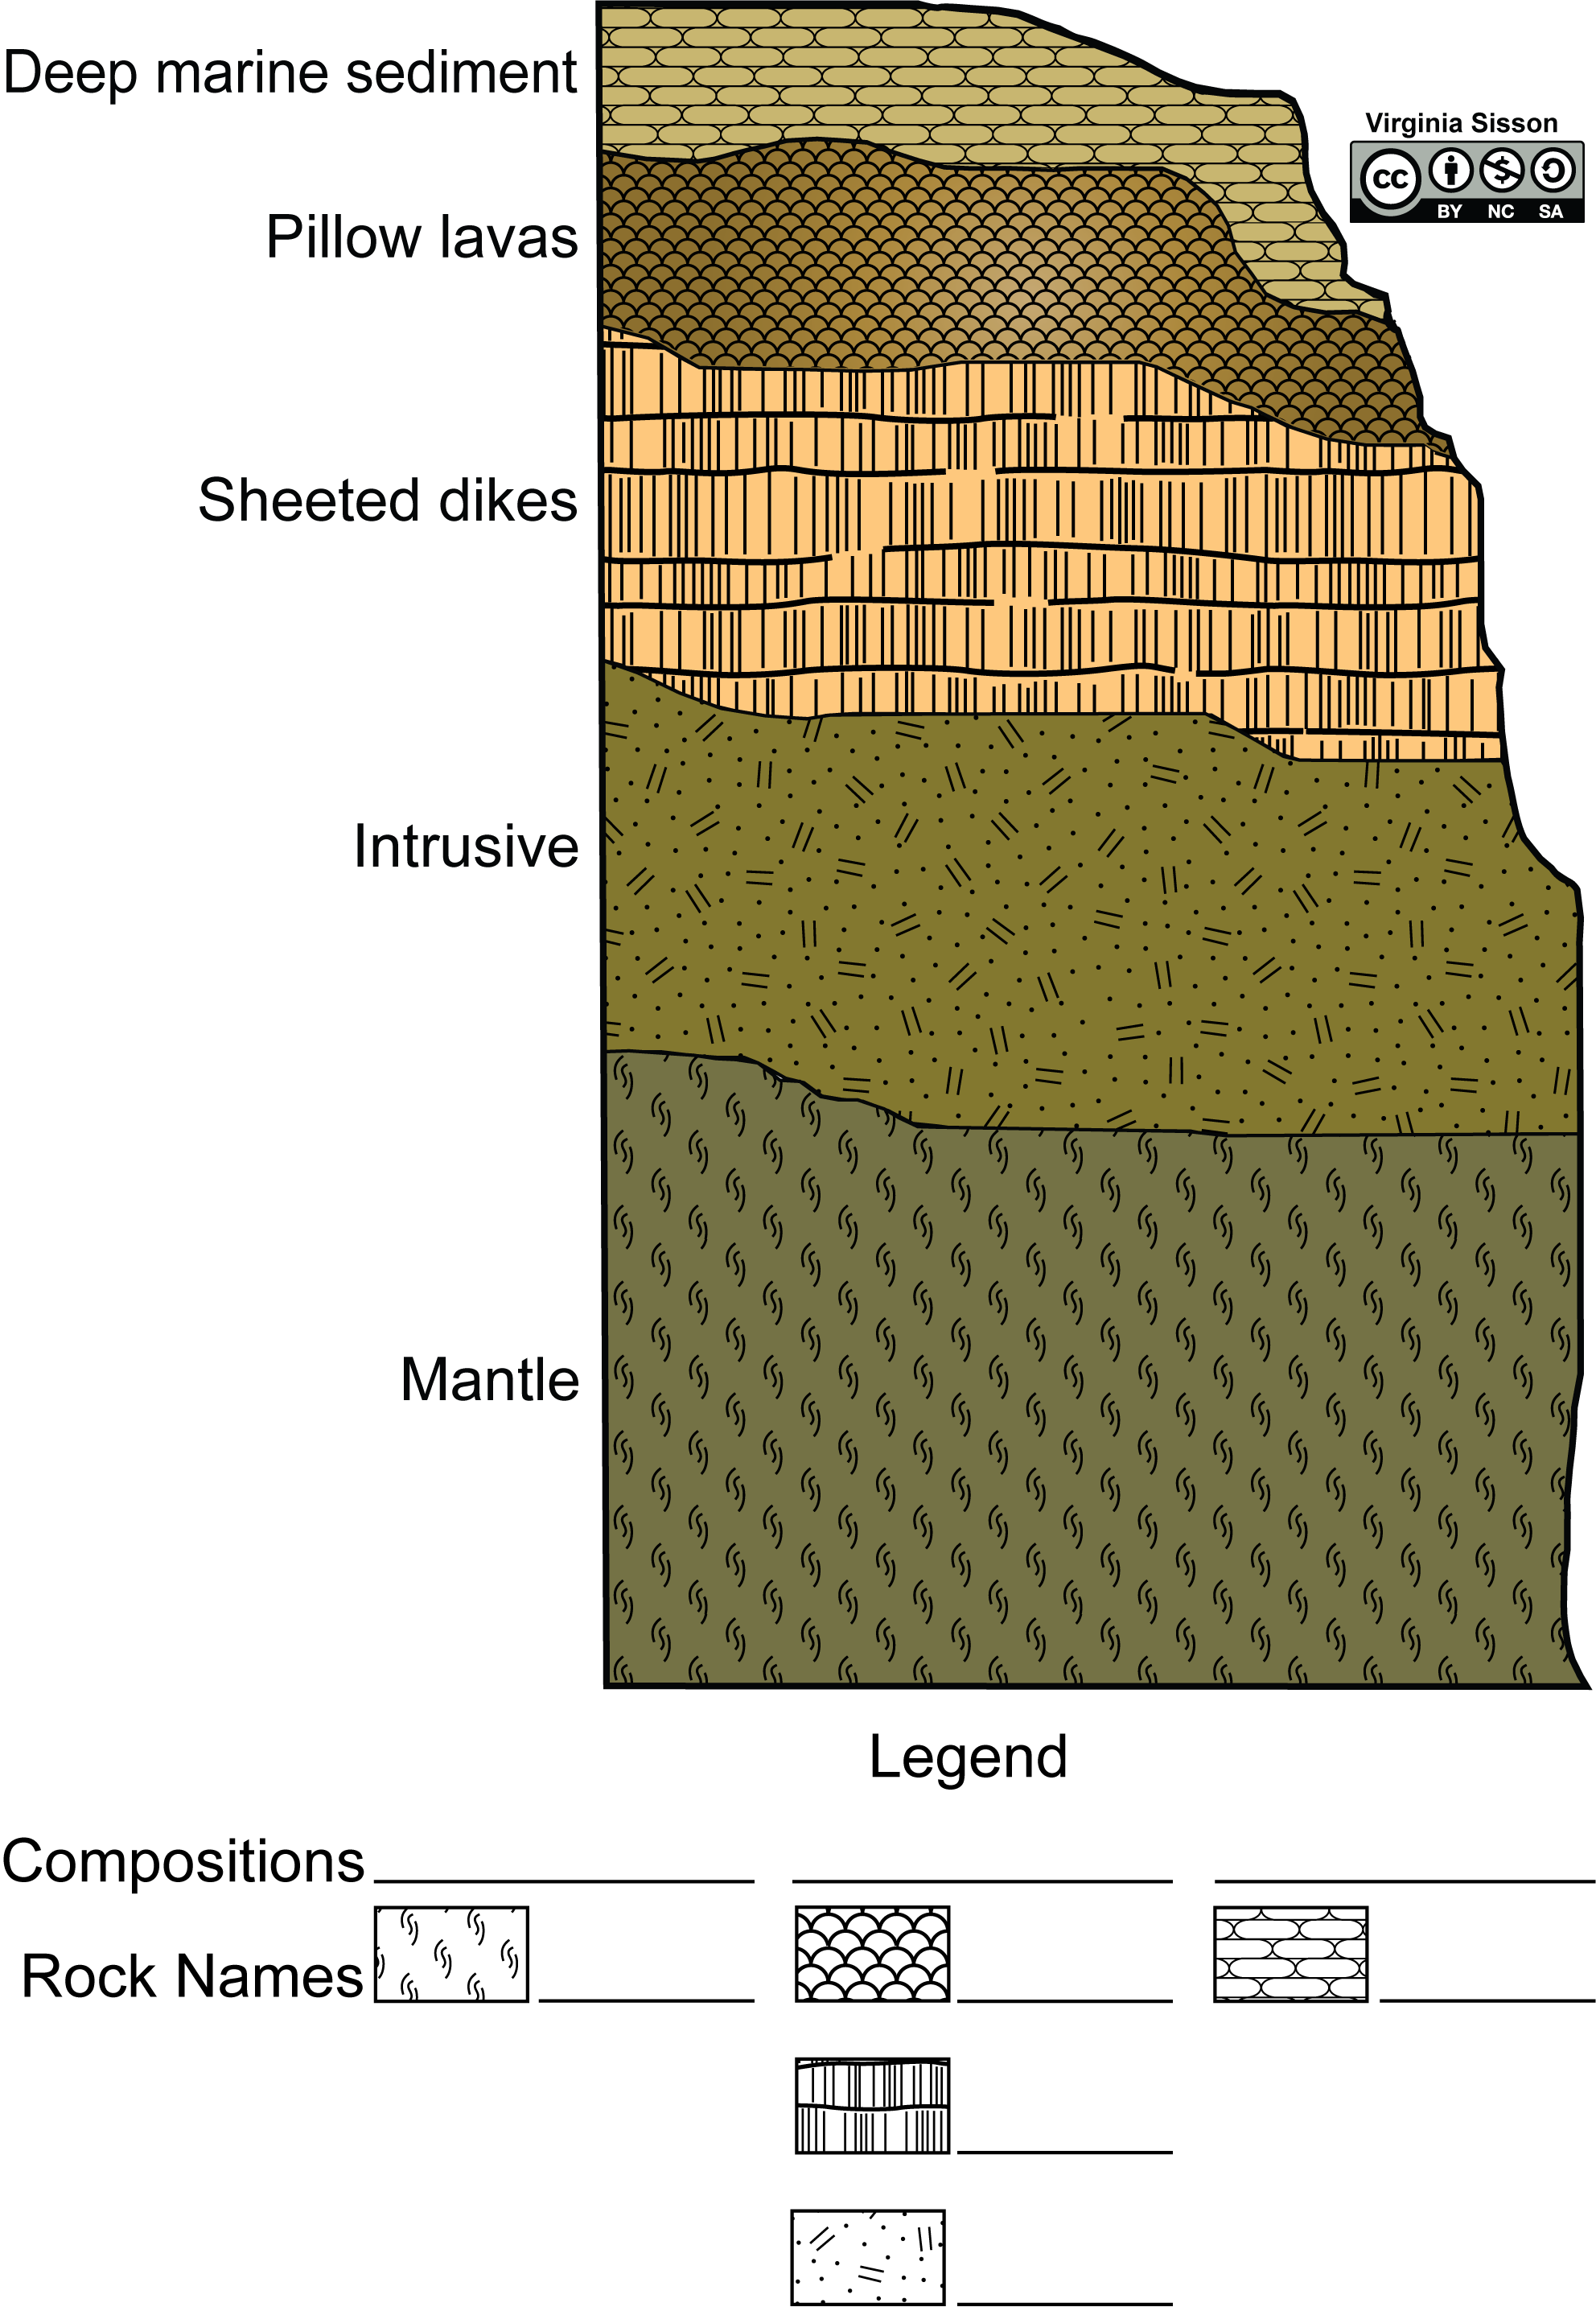 A sequence of igneous and sedimentary rocks found in ophiolite complexes.